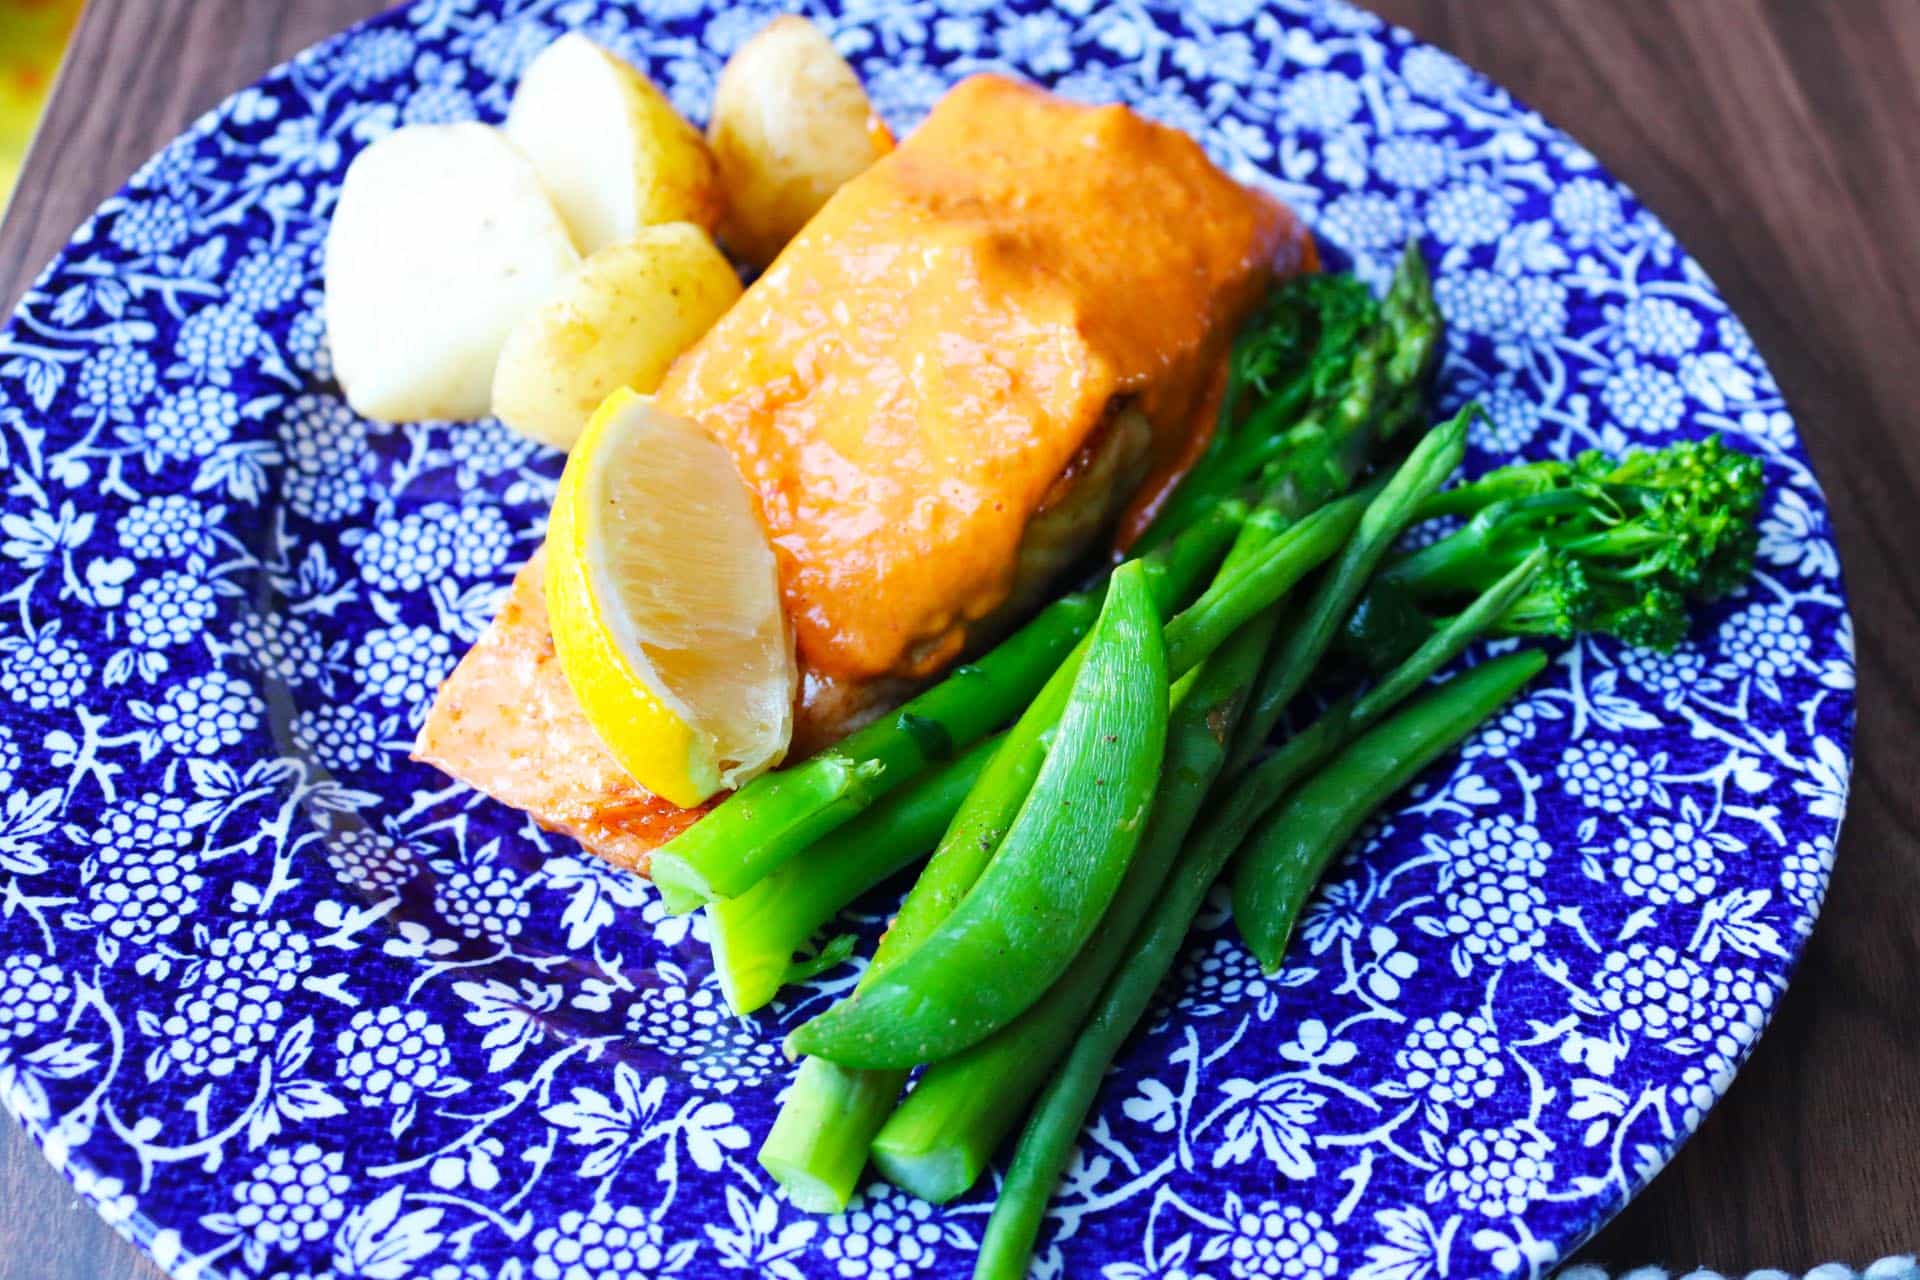 Salmon fillet dressed with the hollandaise on a blue and white dinner plate with green veg and new potatoes